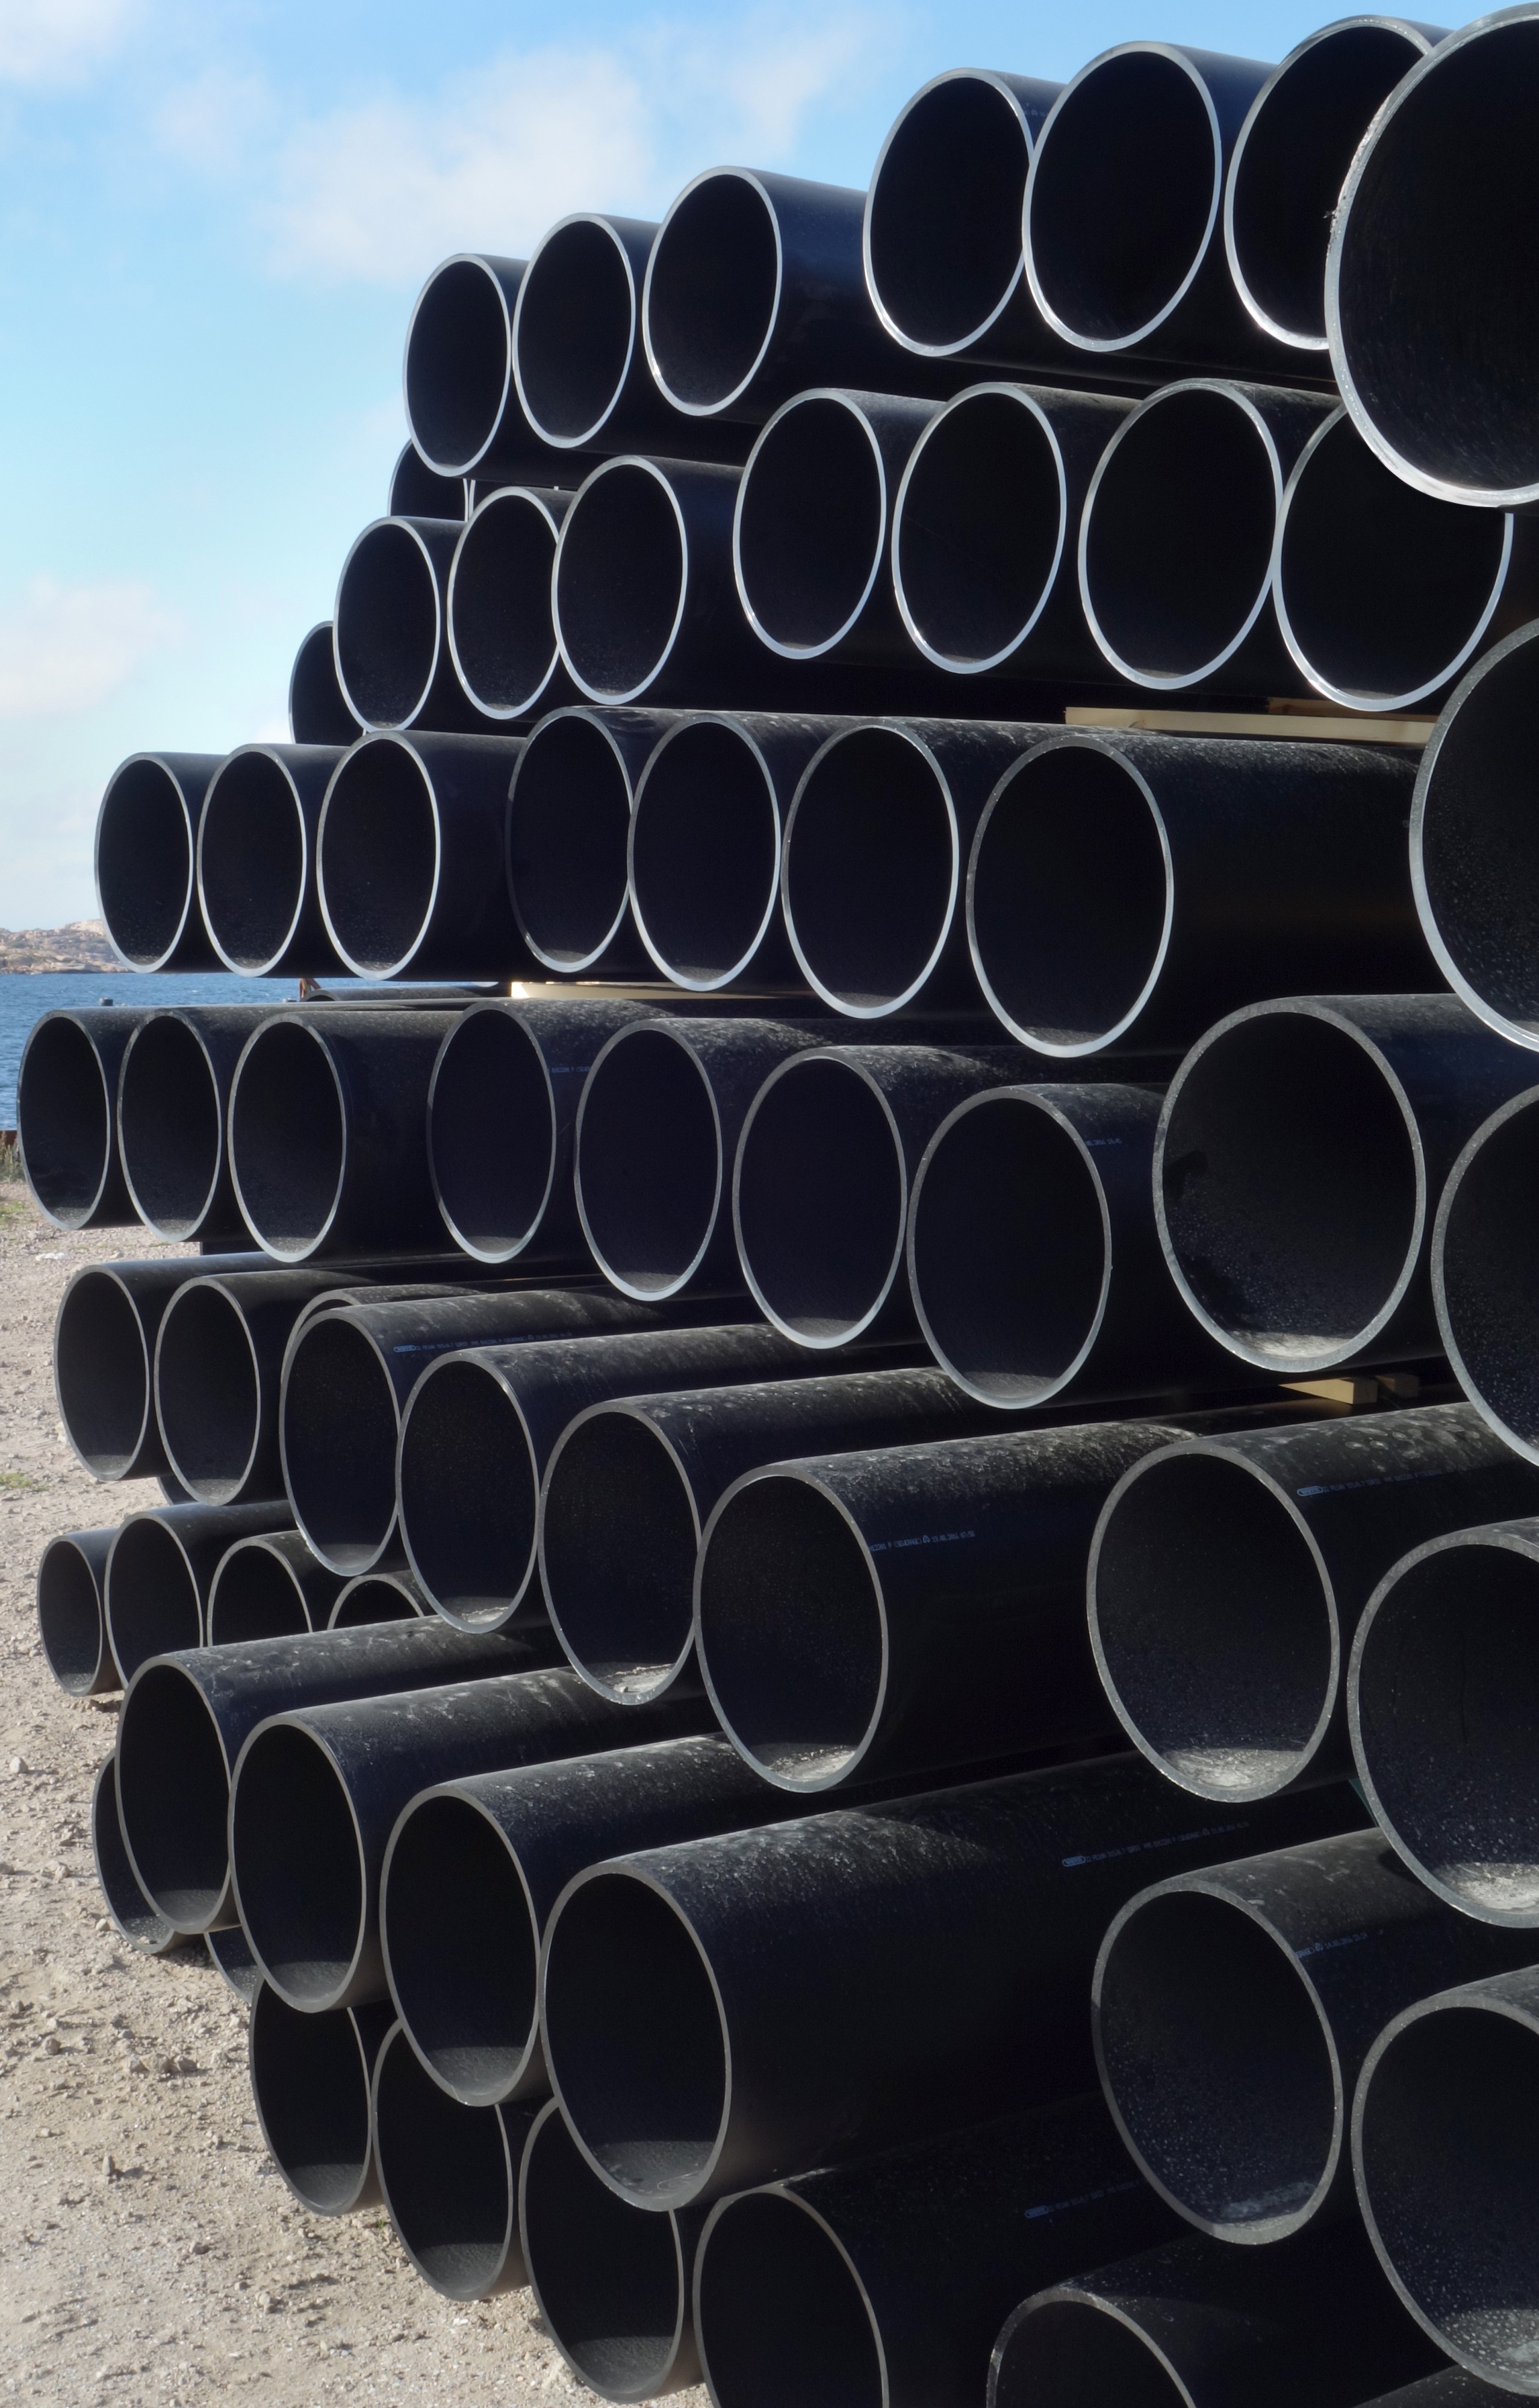 Stack of large dusty black plastic pipes